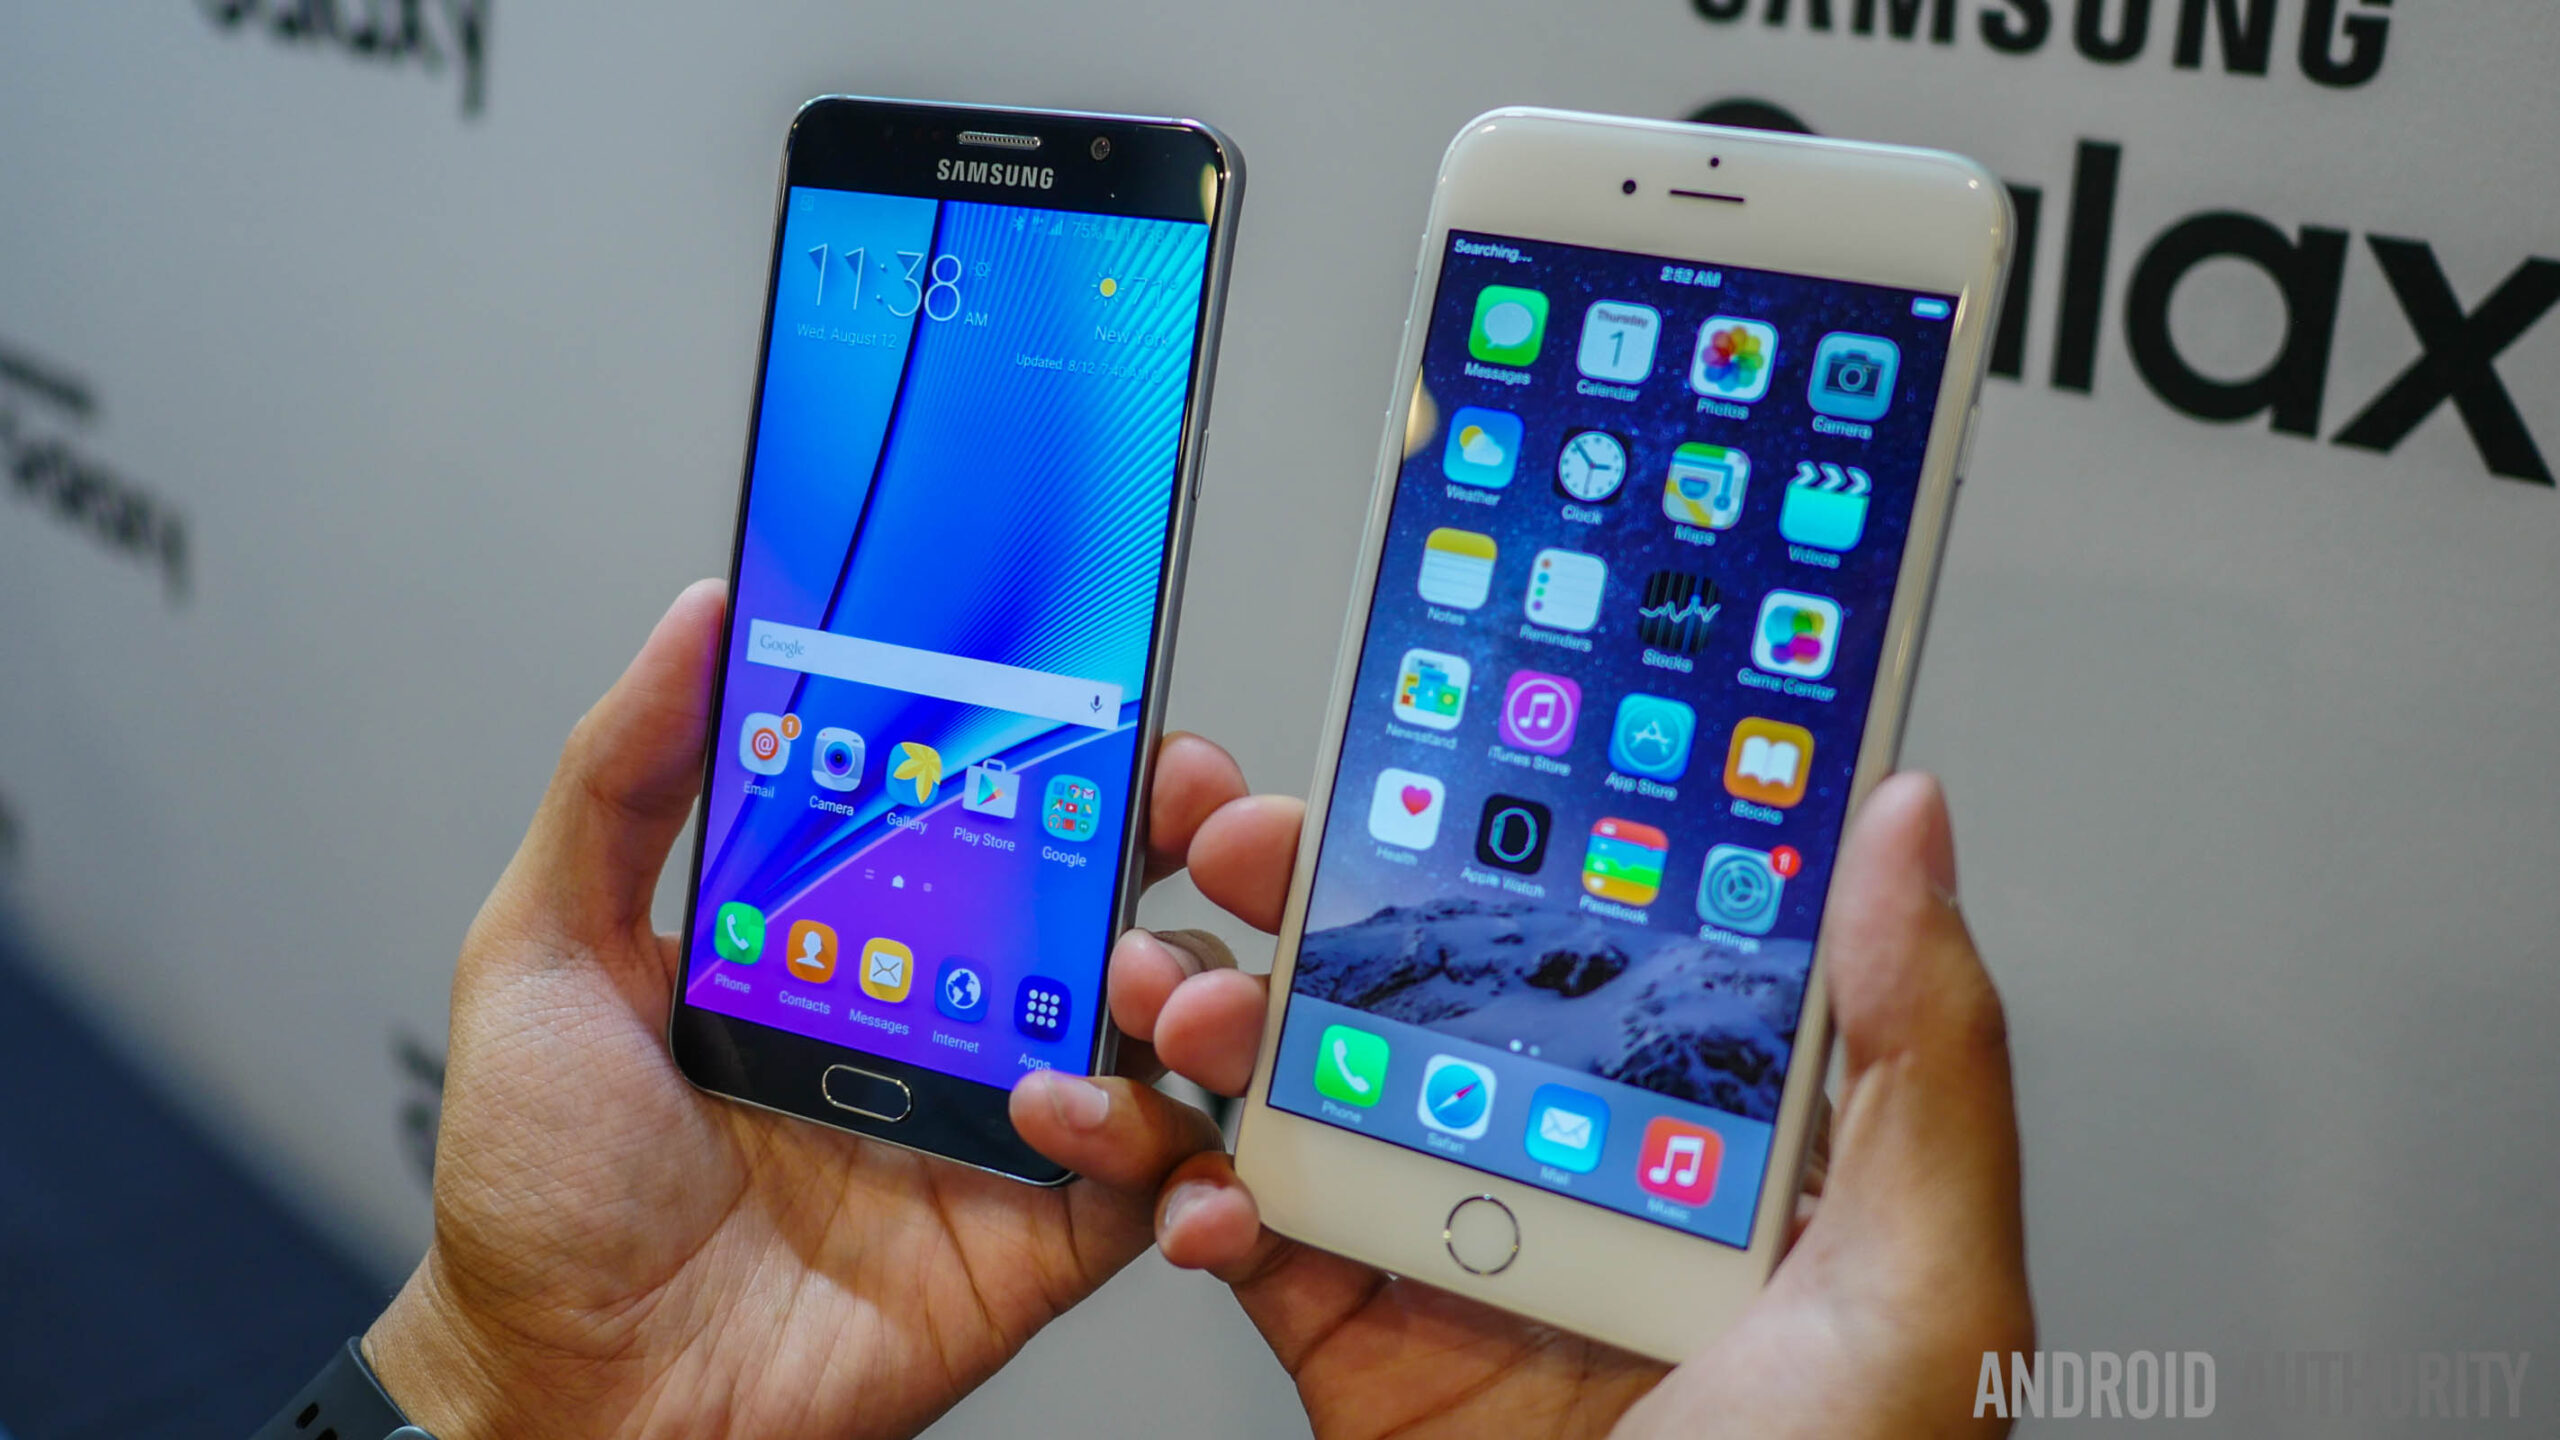 samsung galaxy note 5 vs iphone 6 plus aa (12 of 13)